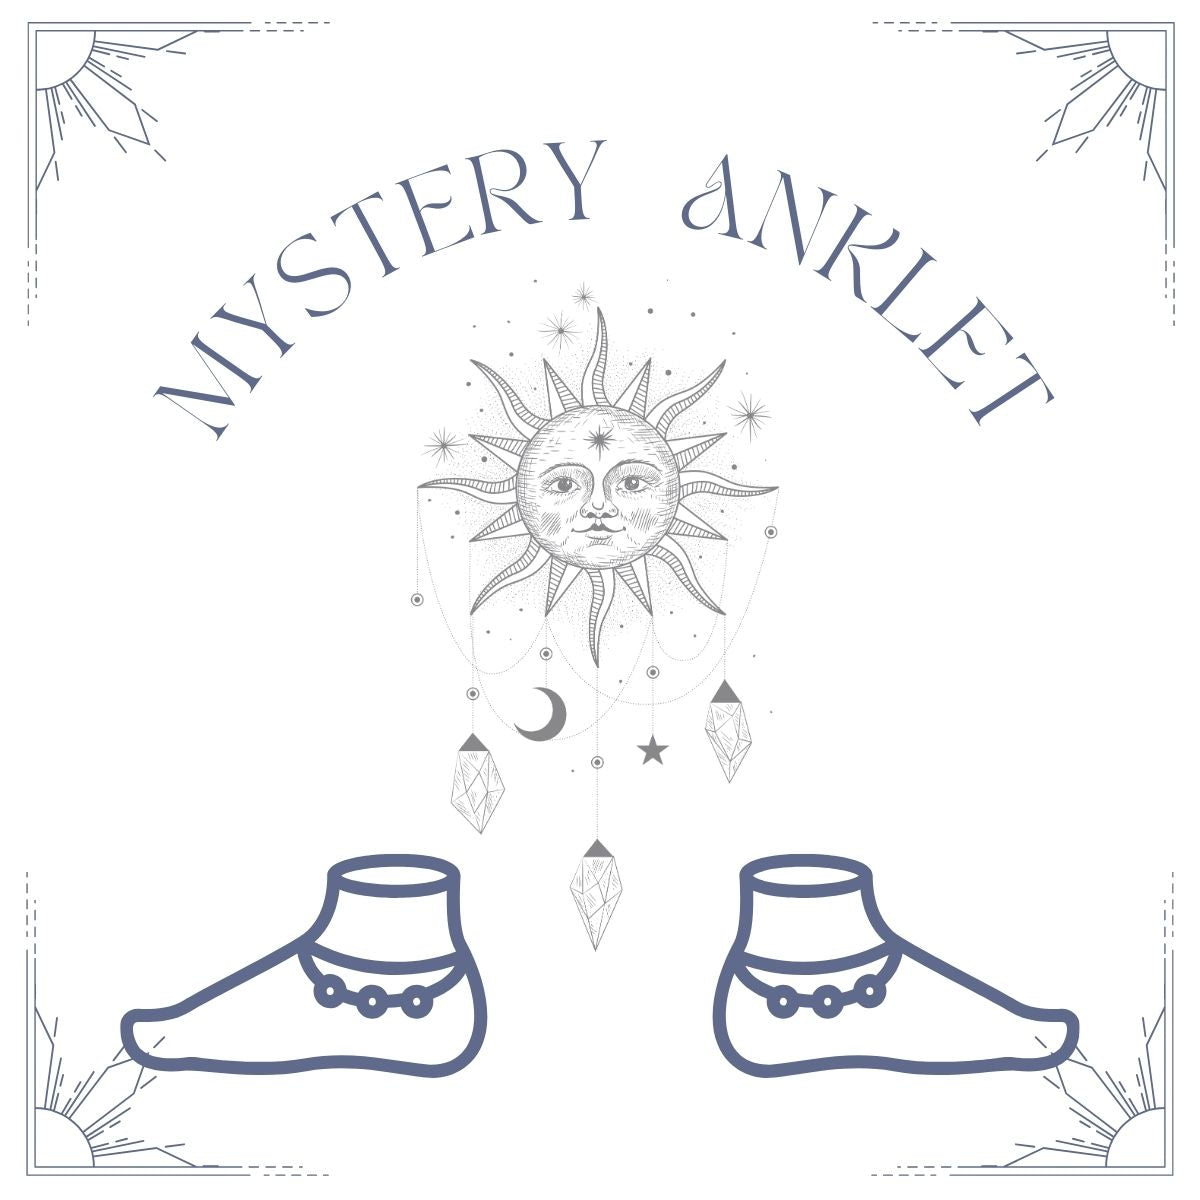 Mystery Anklet: Encapsulated in mystery and intrigue, each box holds a secret gemstone anklet, waiting to unveil its enchanting properties and energies.